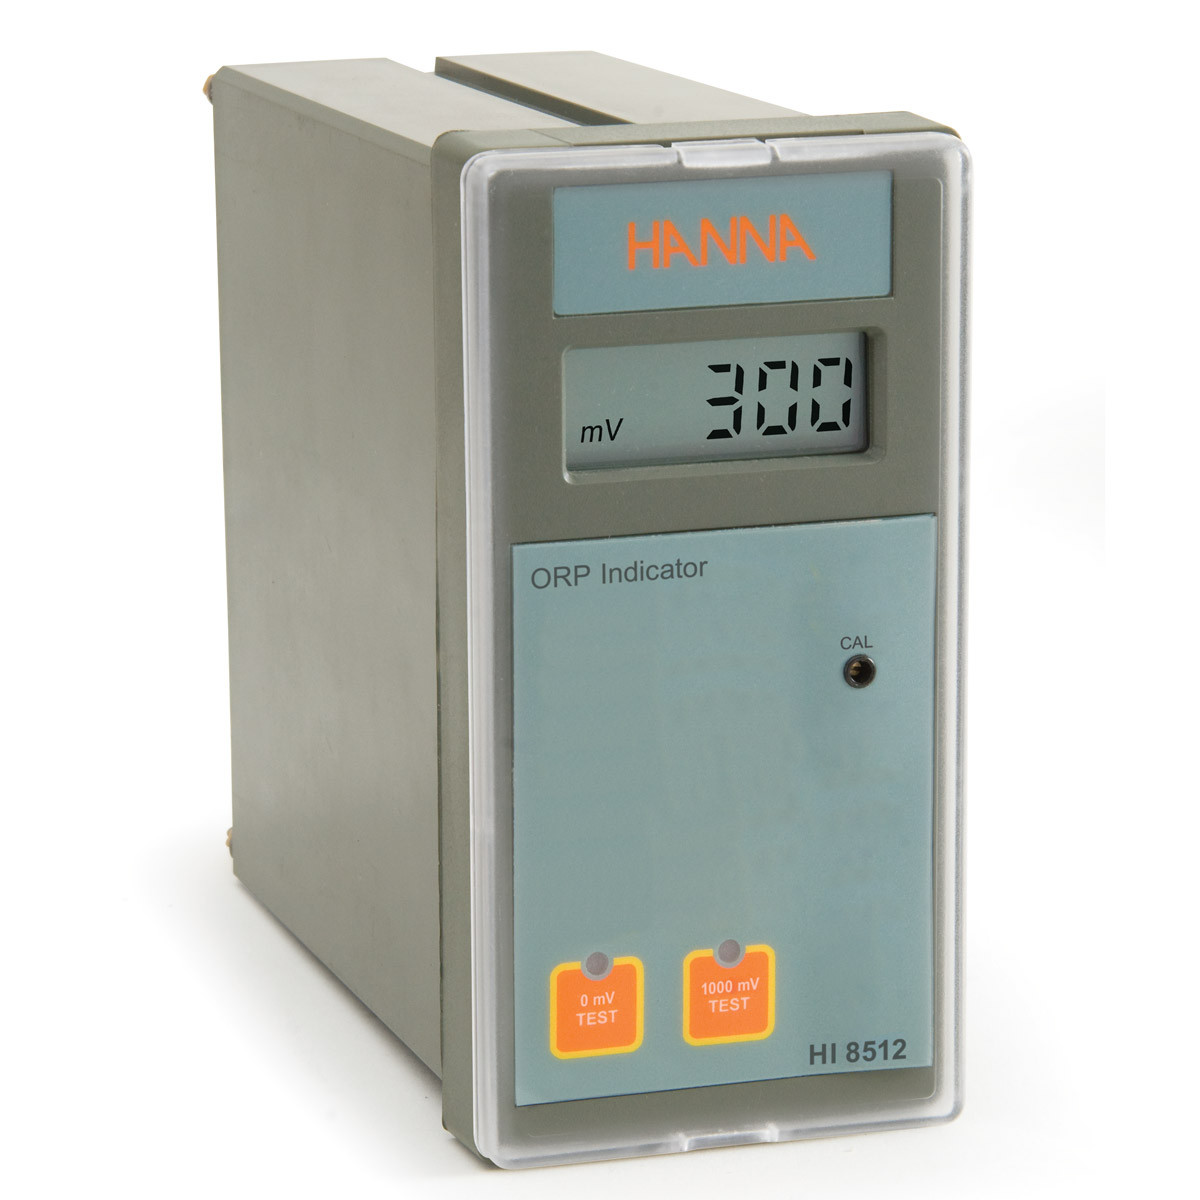 Hanna ORP Meter used for troubleshooting common issues with ORP meters